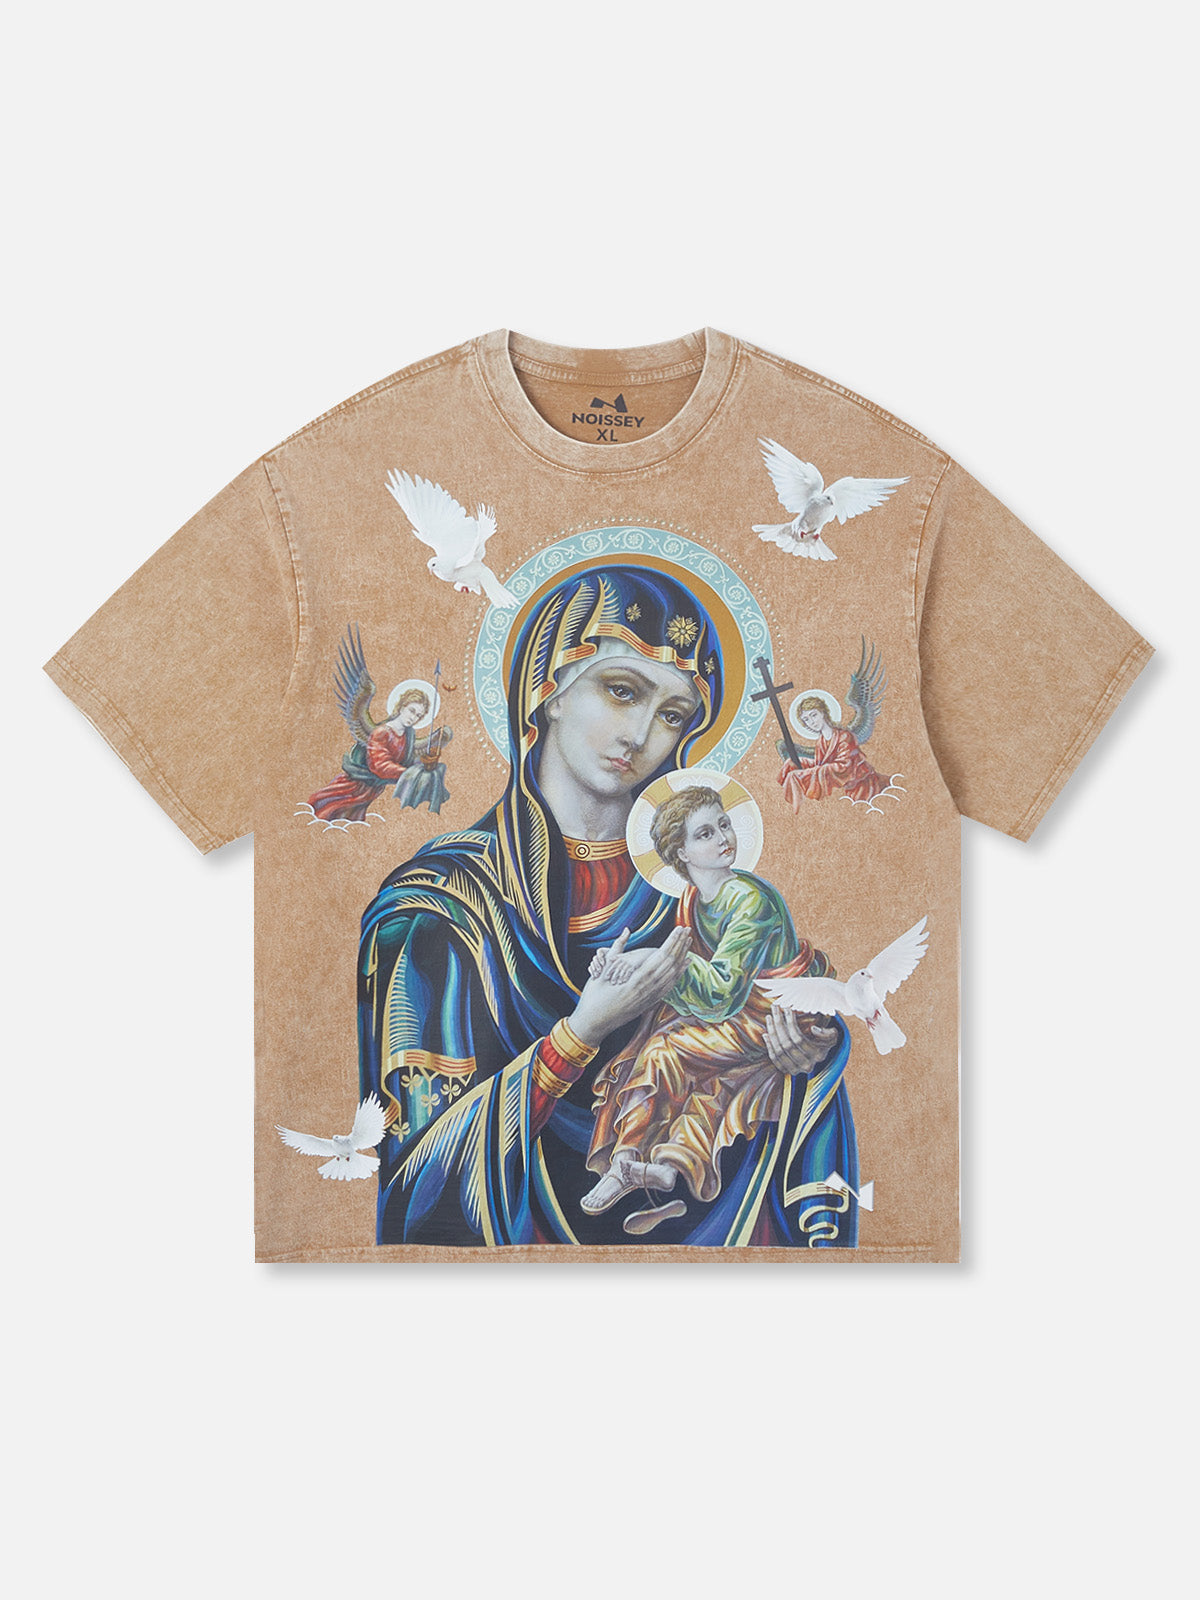 OBSTACLES & DANGERS© Madonna and Child T-SHIRT